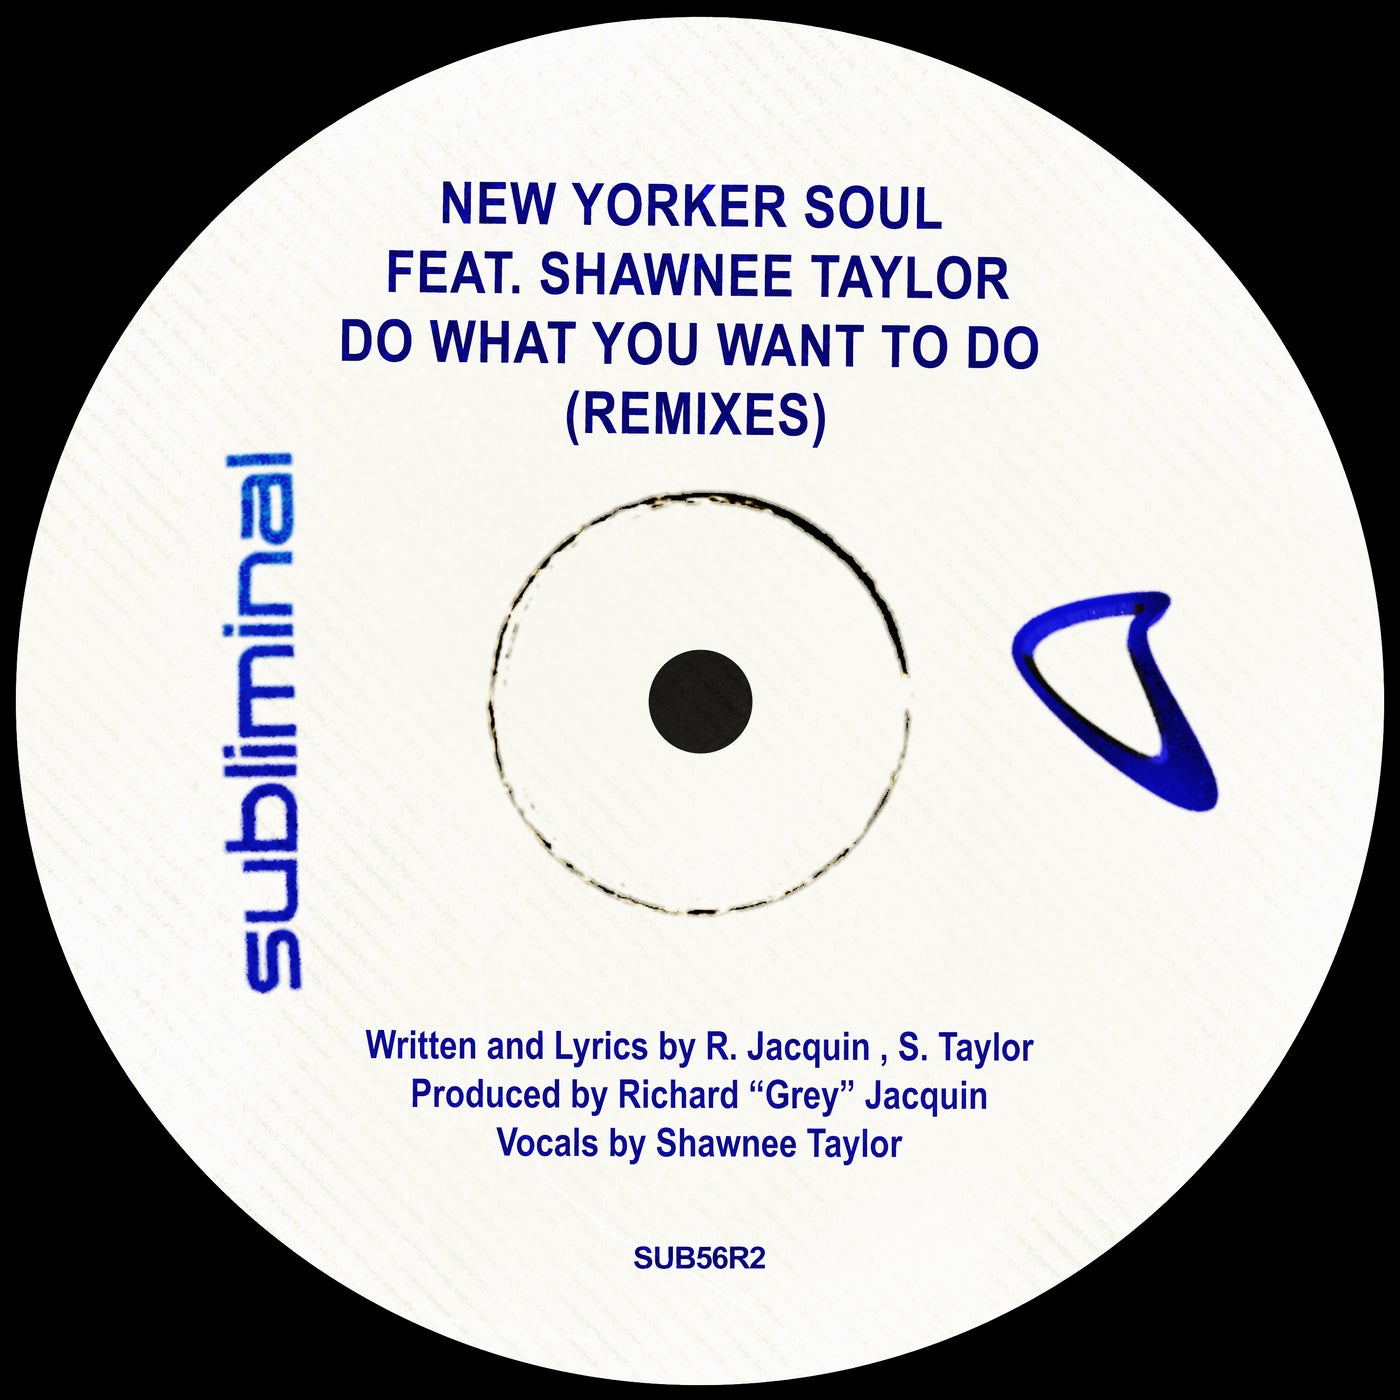 Do What You Want To Do - Remixes